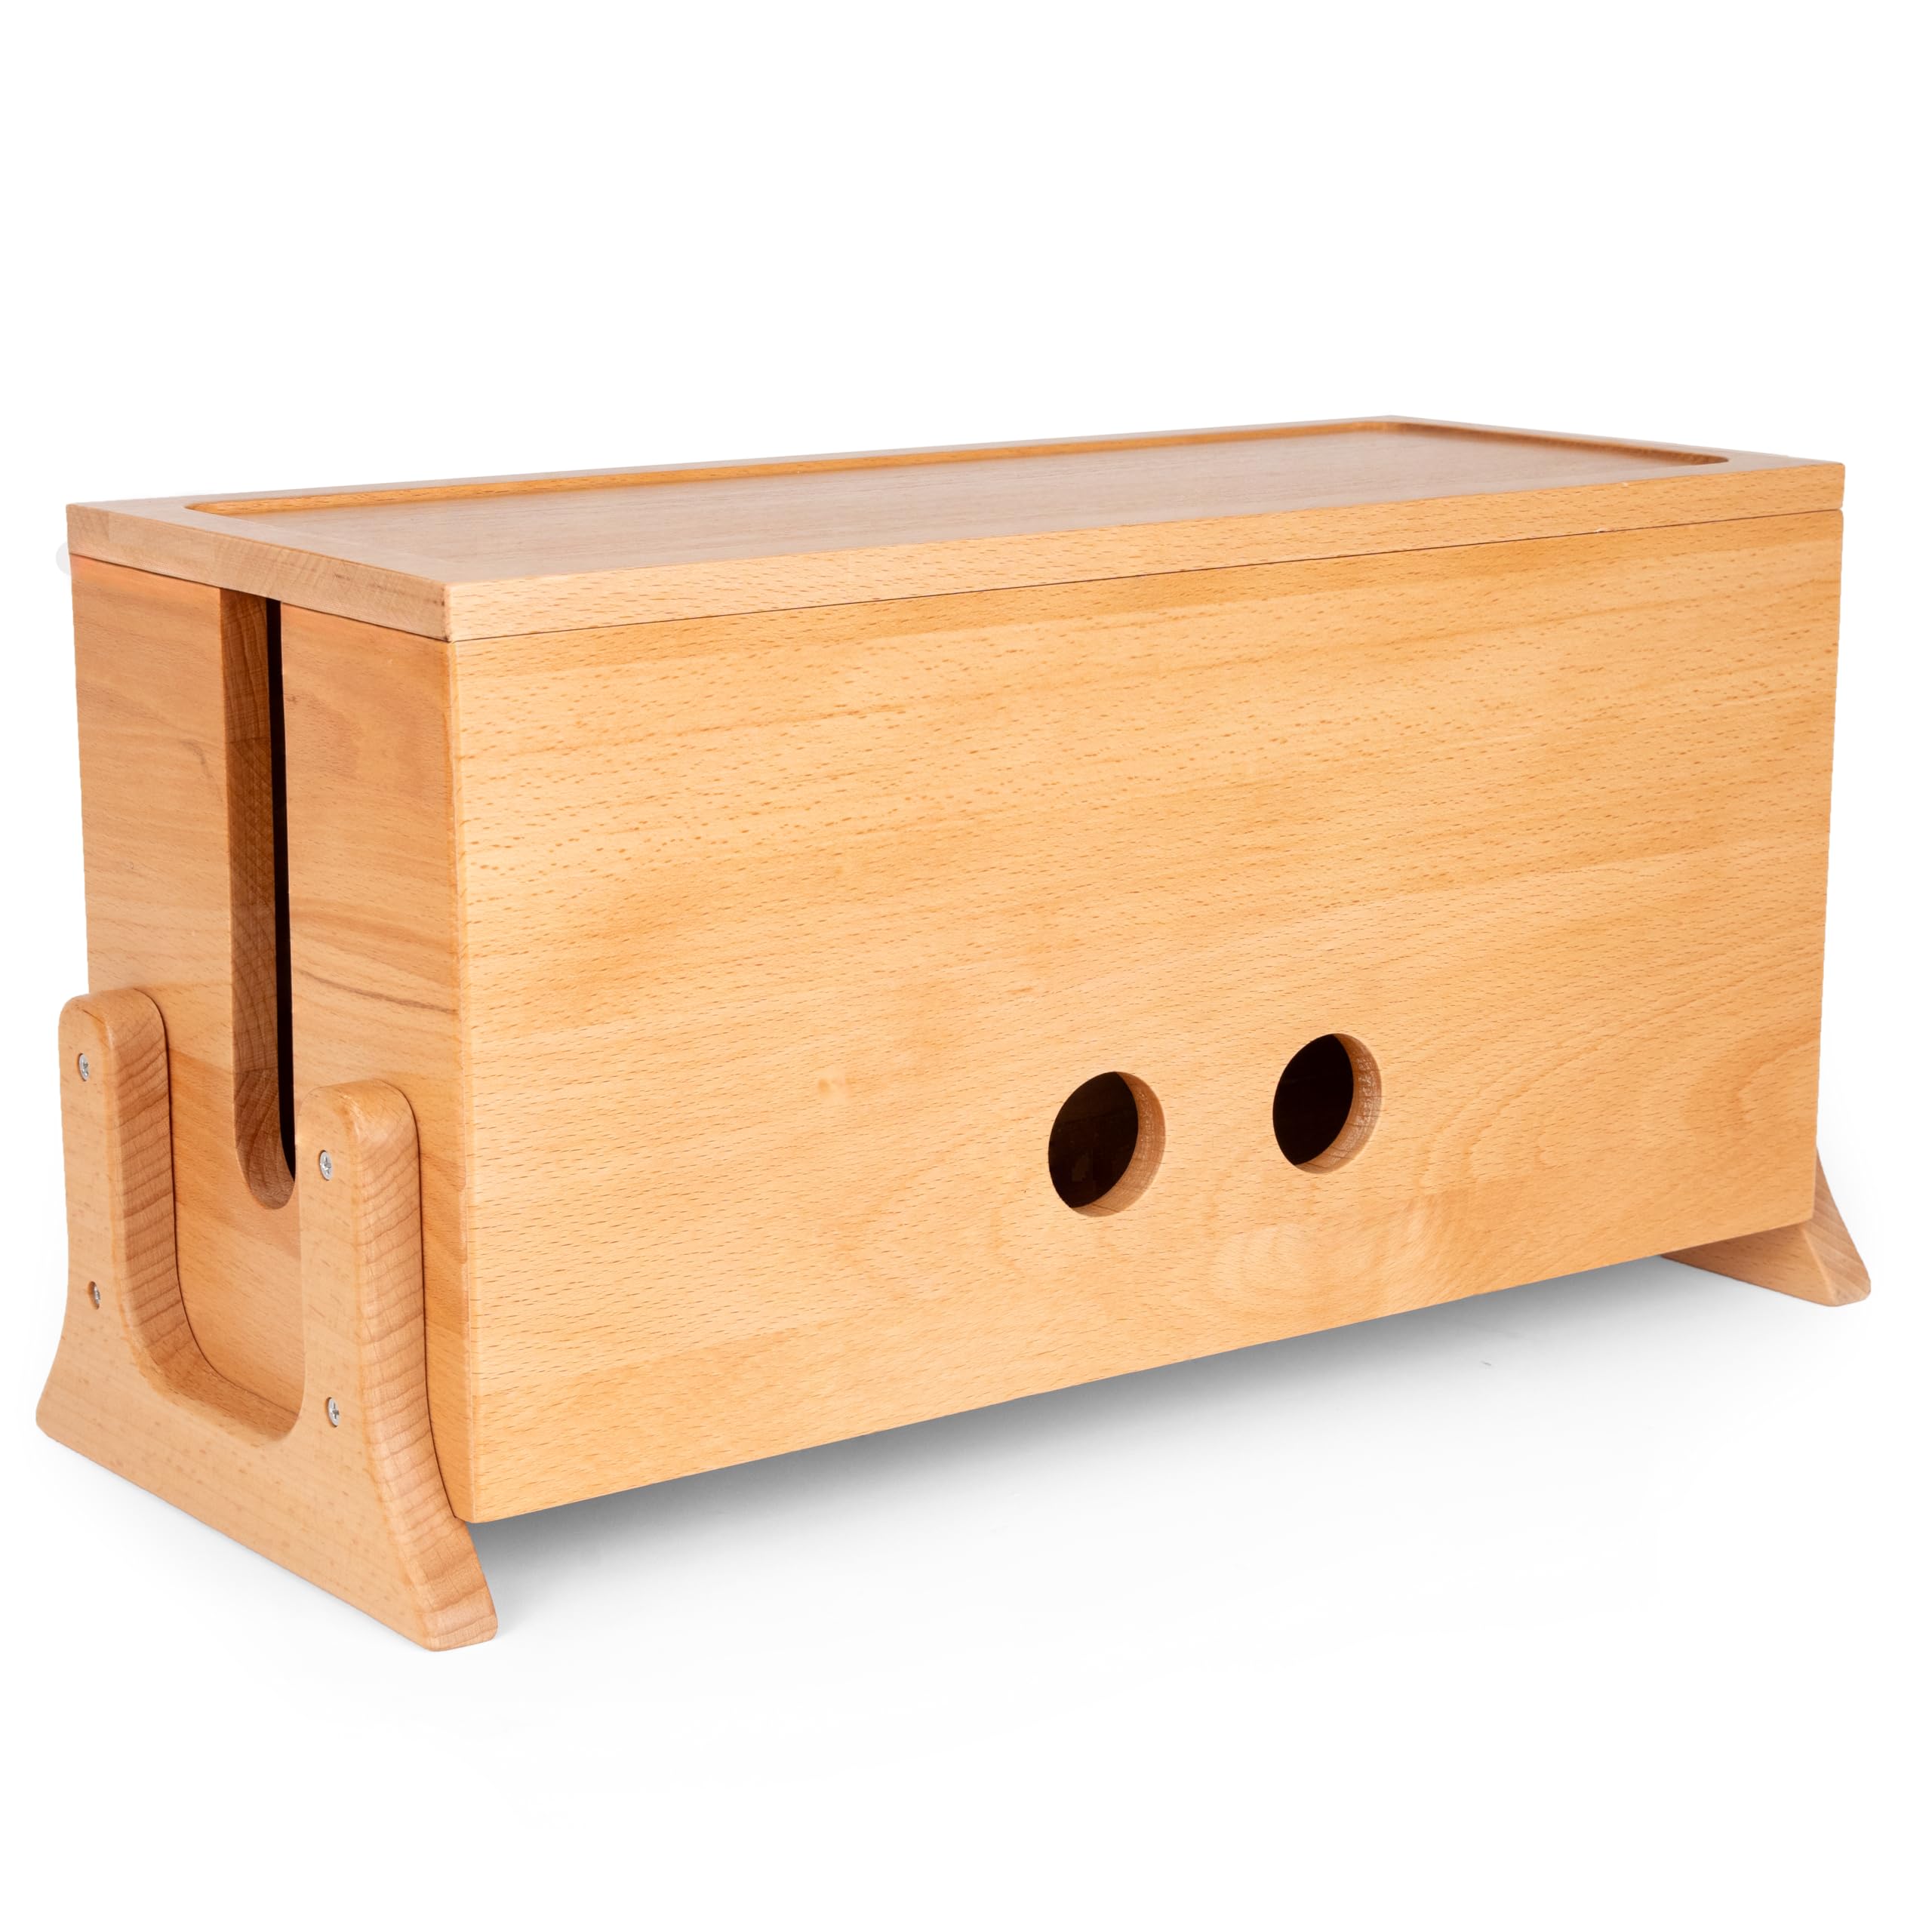 Extra Large Cable Management Box Wood Cord Organizer Box - Cable